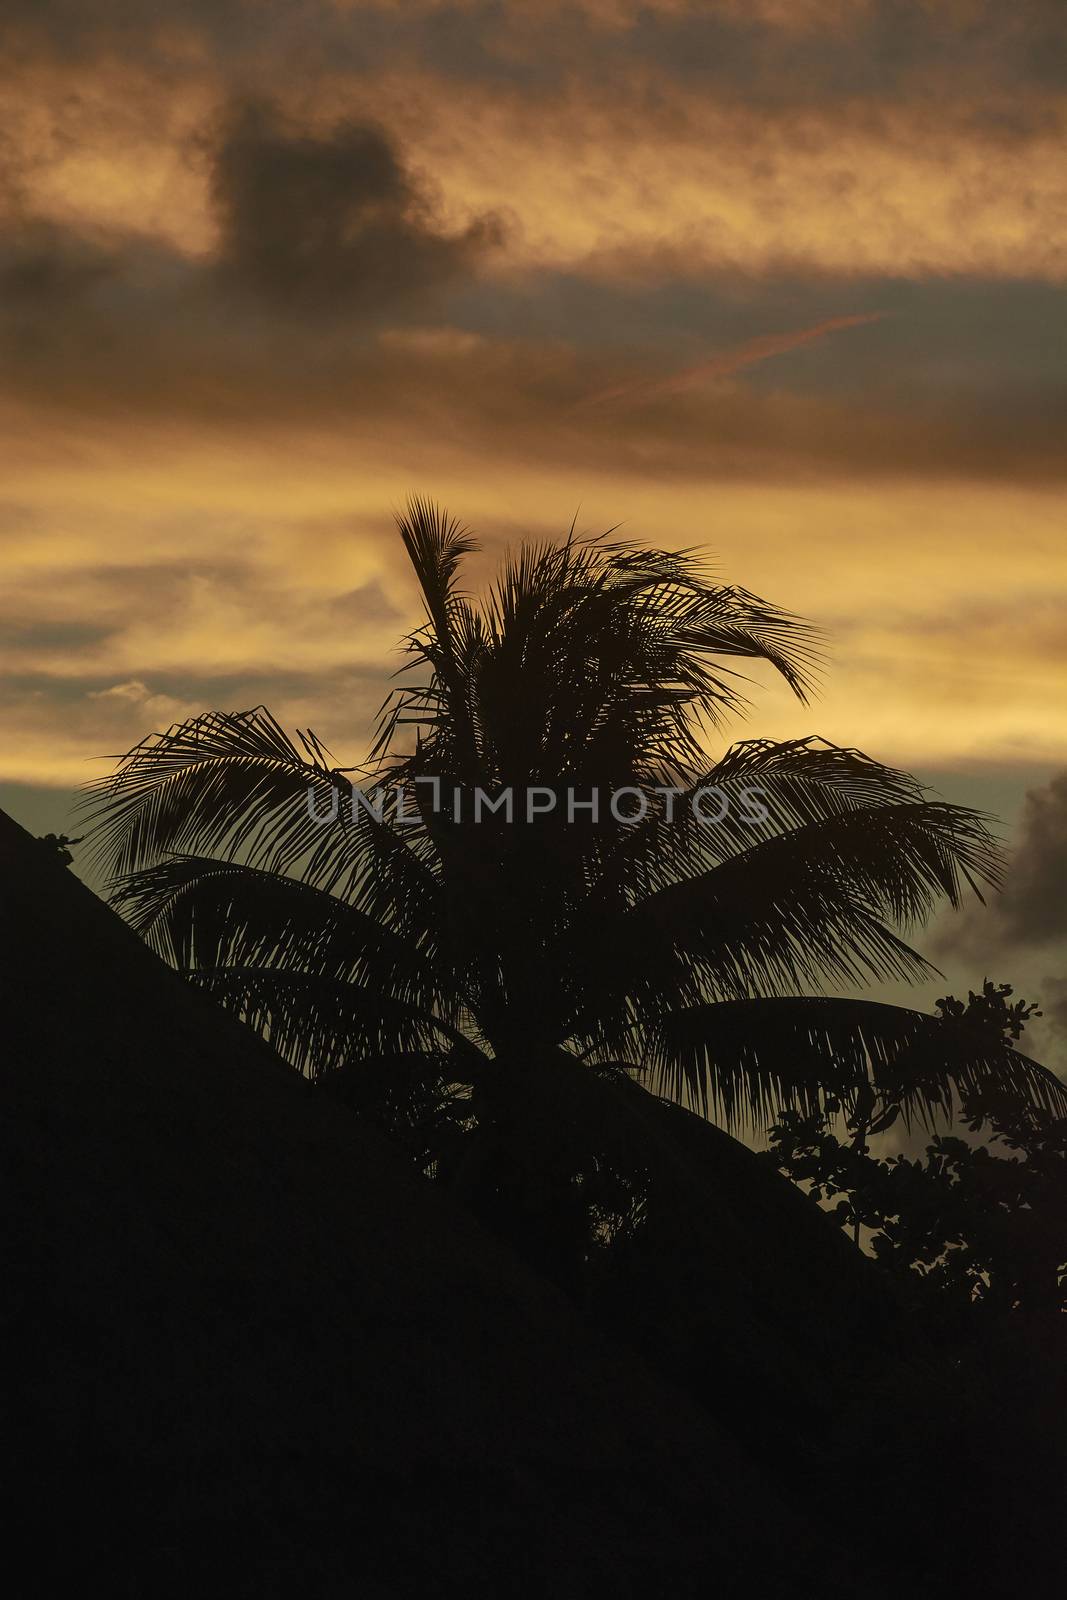 Silhouette of a palm tree at sunset by pippocarlot